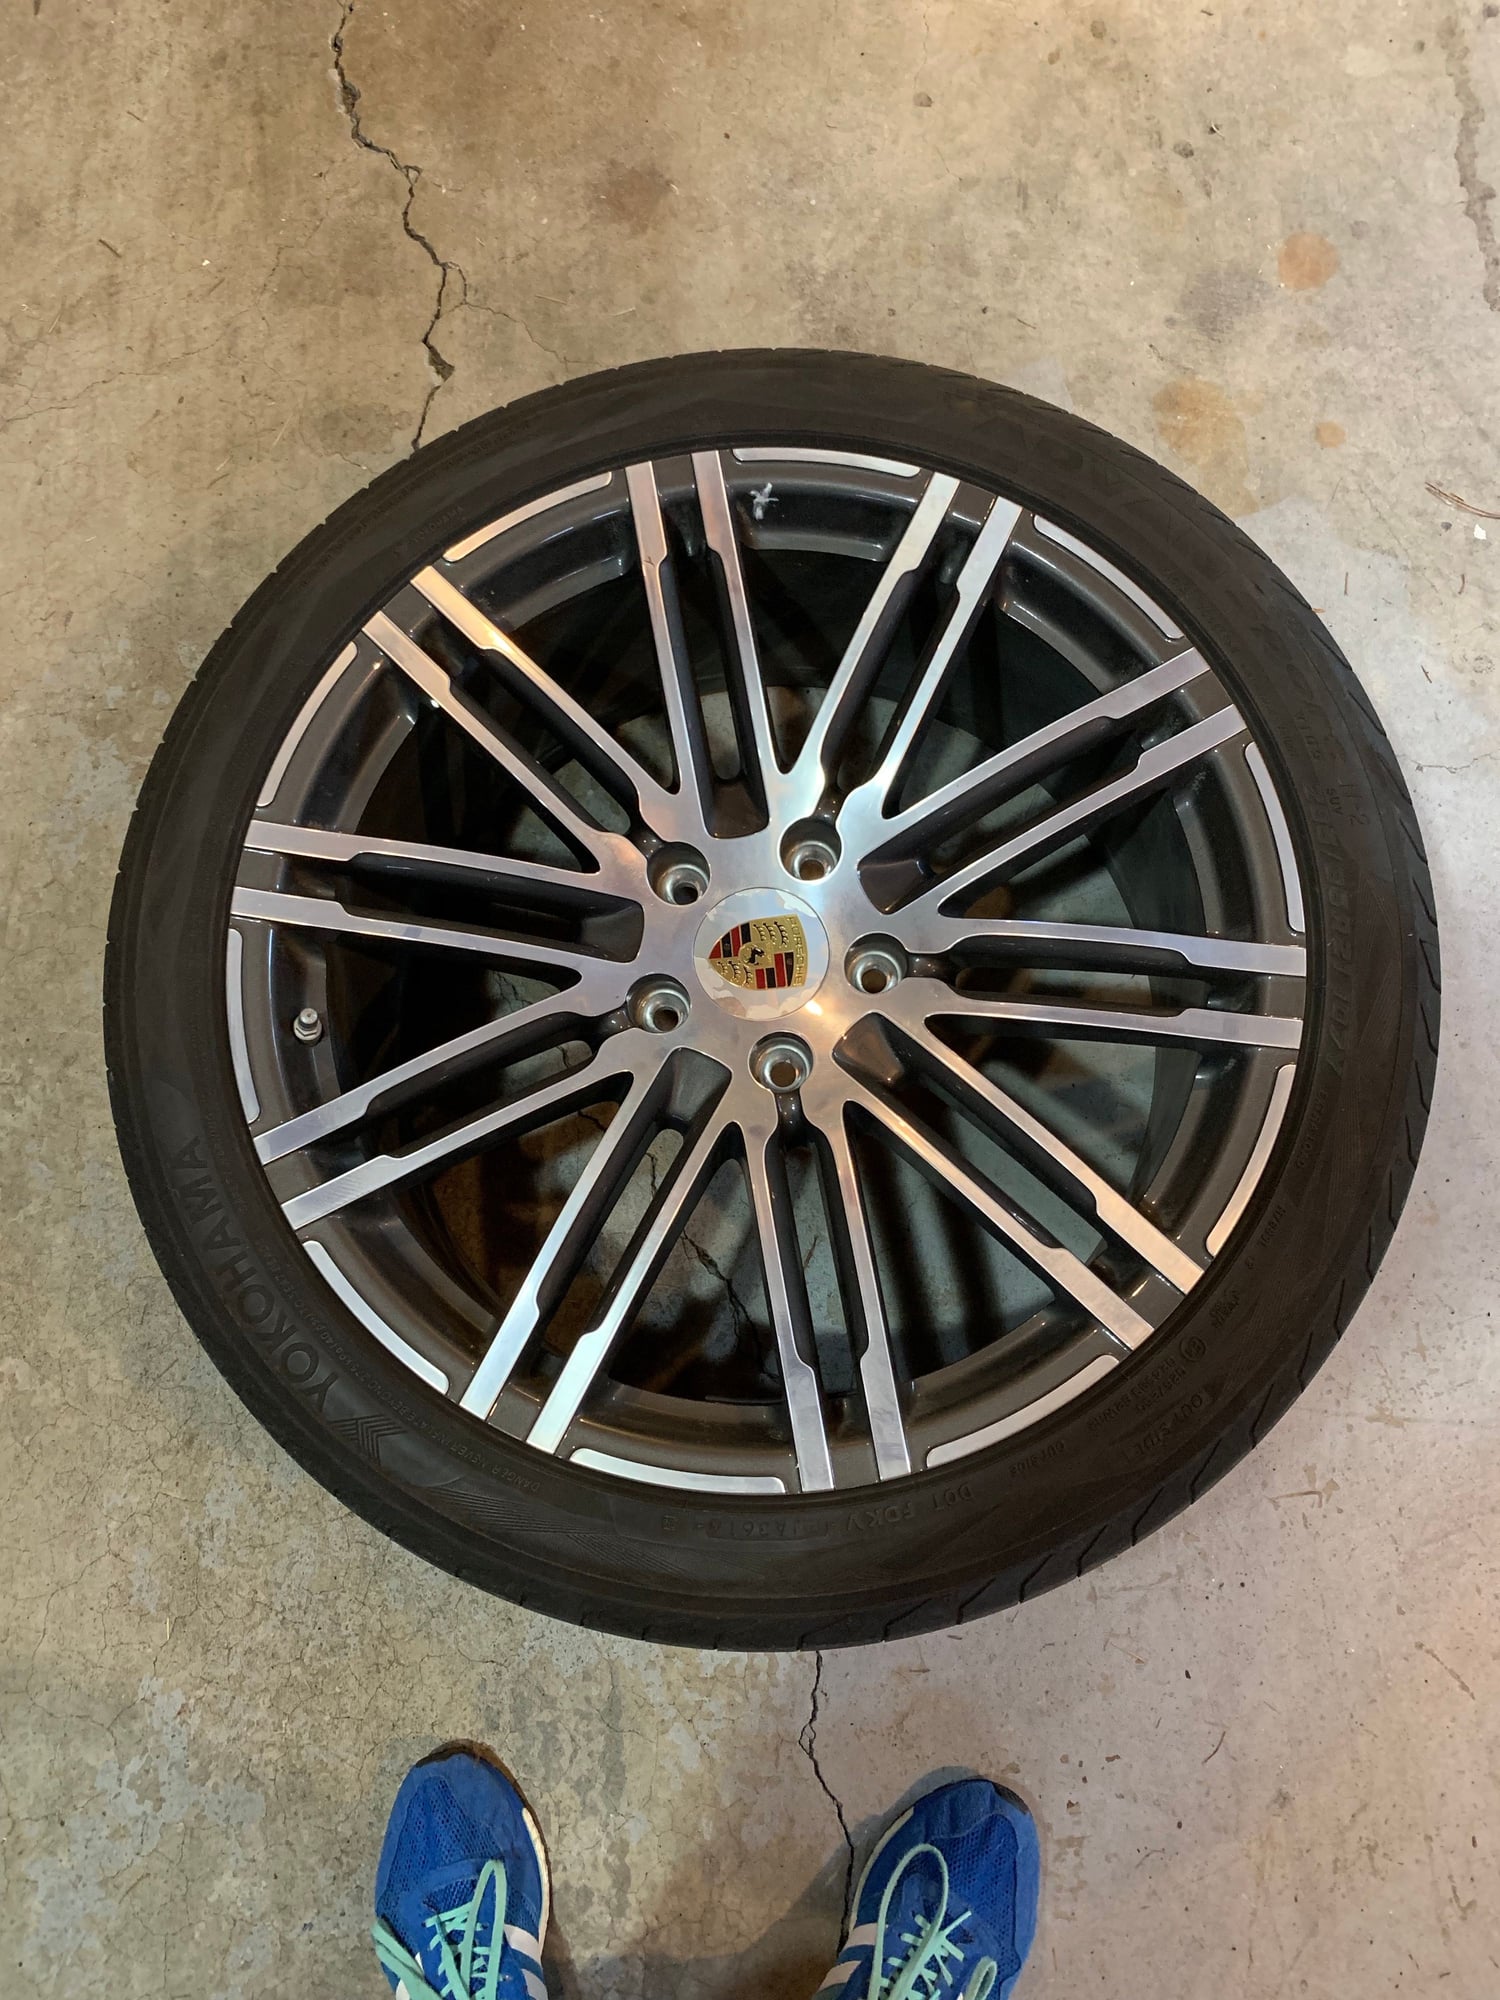 Wheels and Tires/Axles - 21" Cayenne Turbo wheels/tires (TPMS incl.) - Used - 2011 to 2019 Porsche Cayenne - Redmond, WA 98052, United States